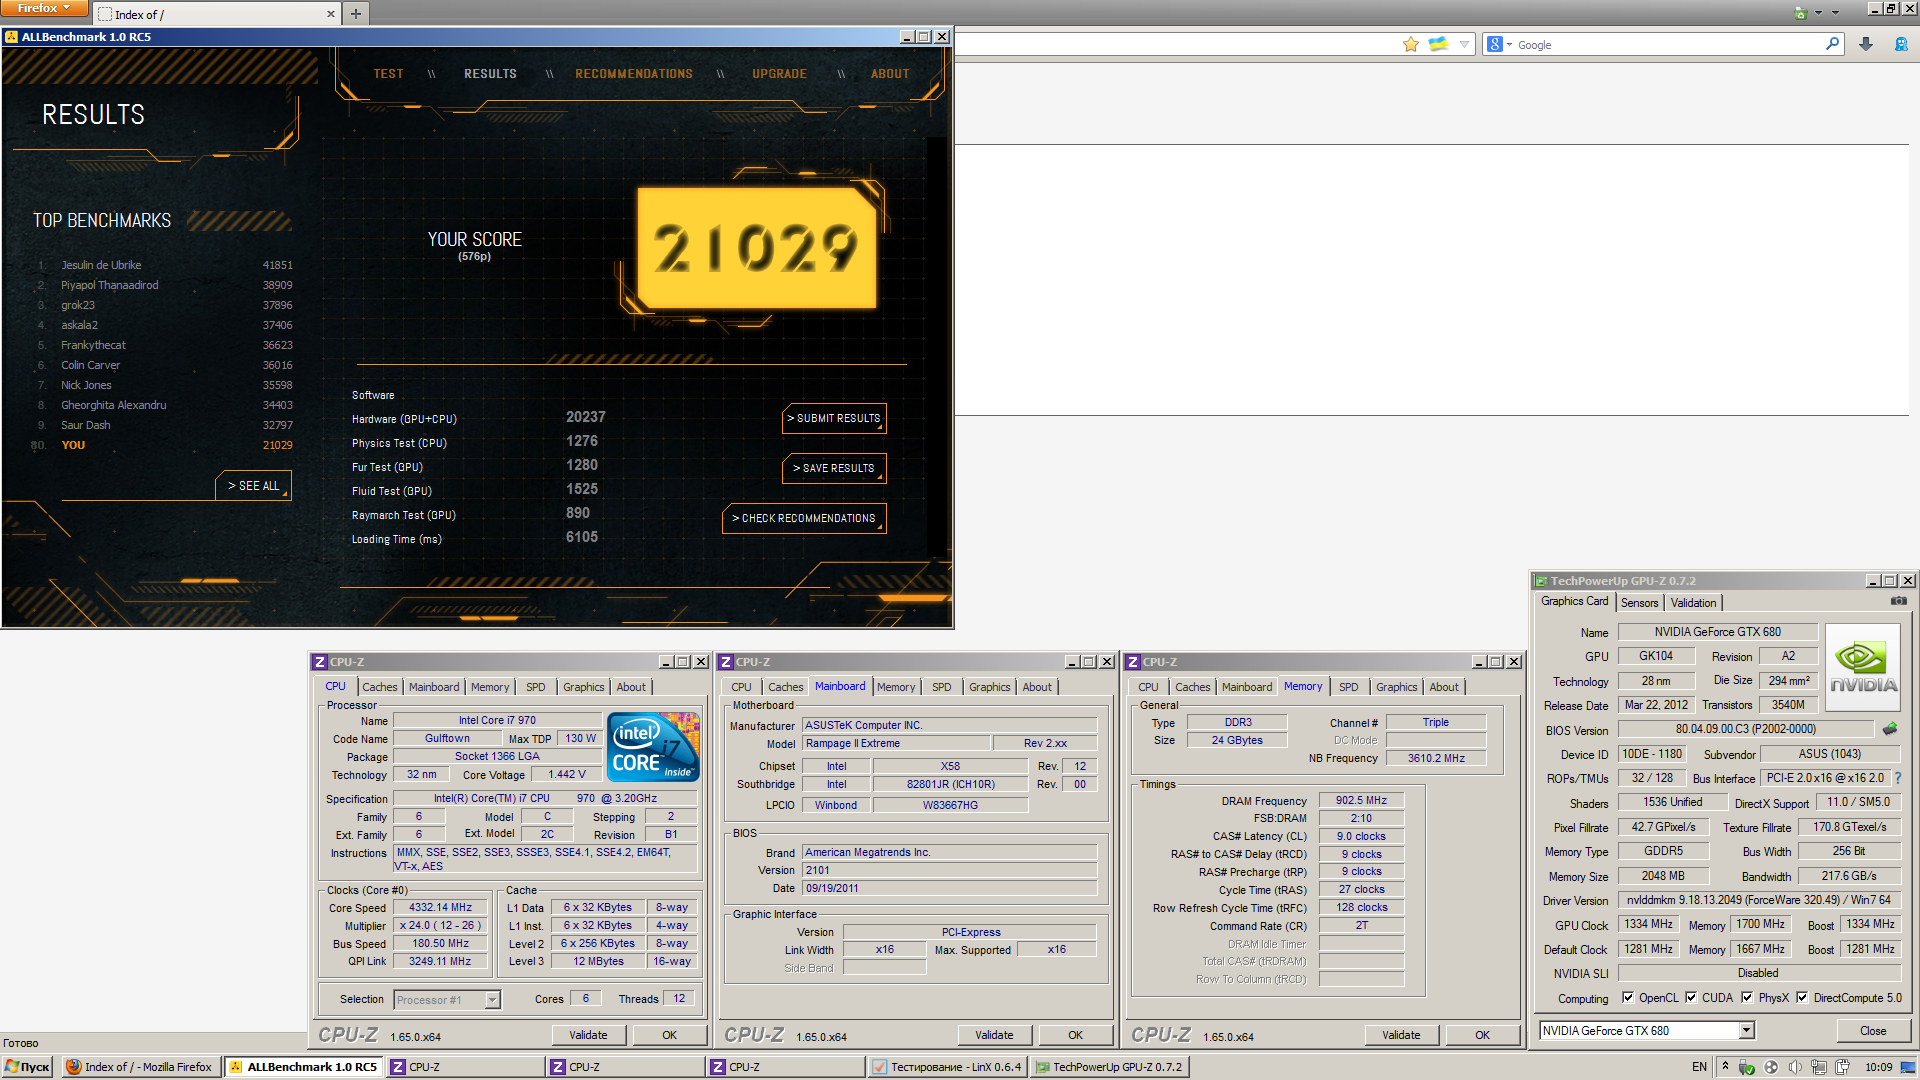 xe-xe`s Catzilla - 576p score: 21029 marks with a GeForce GTX 680